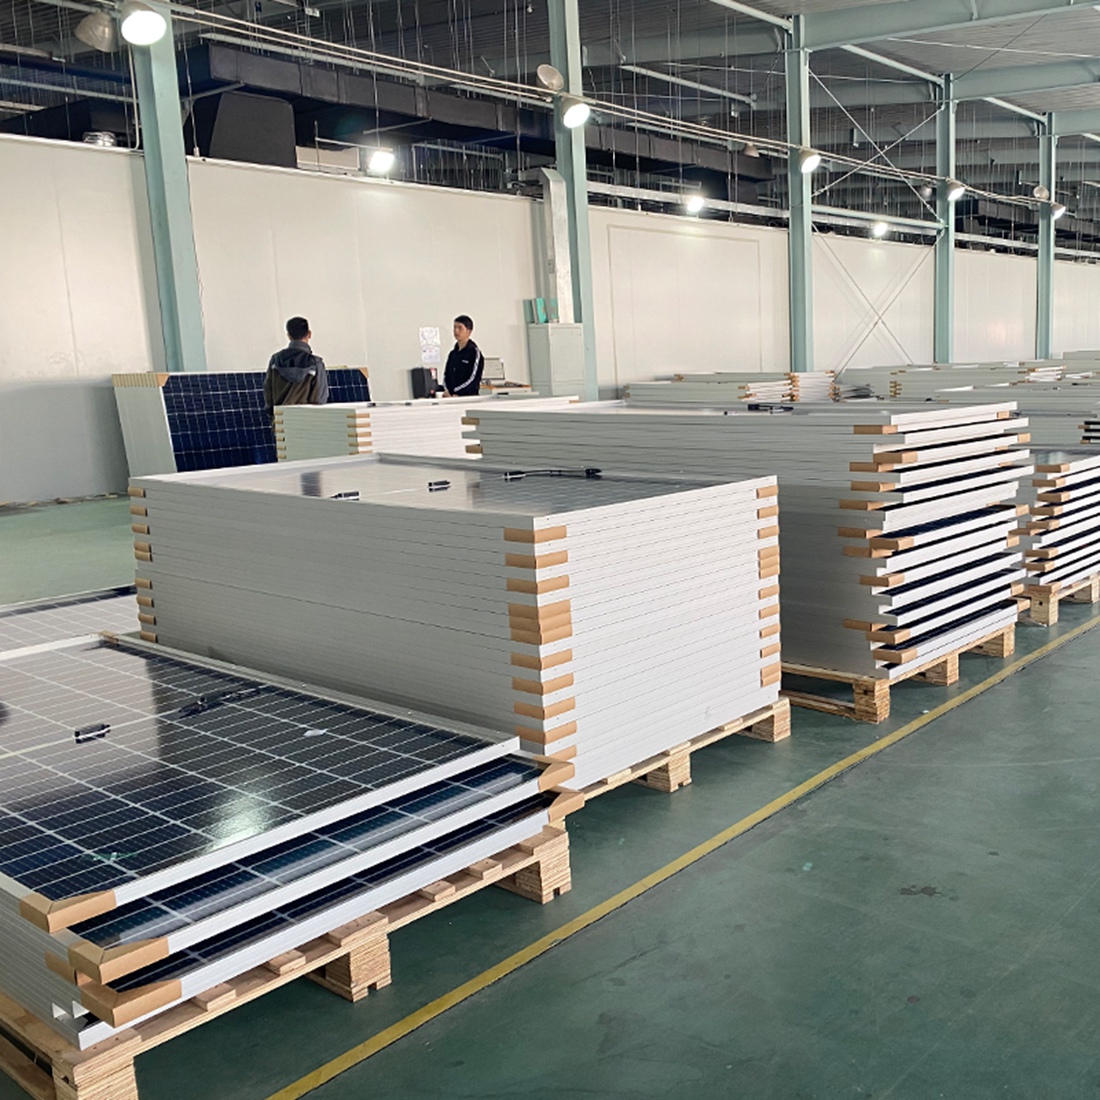 Boland's Photovoltaic product production chain